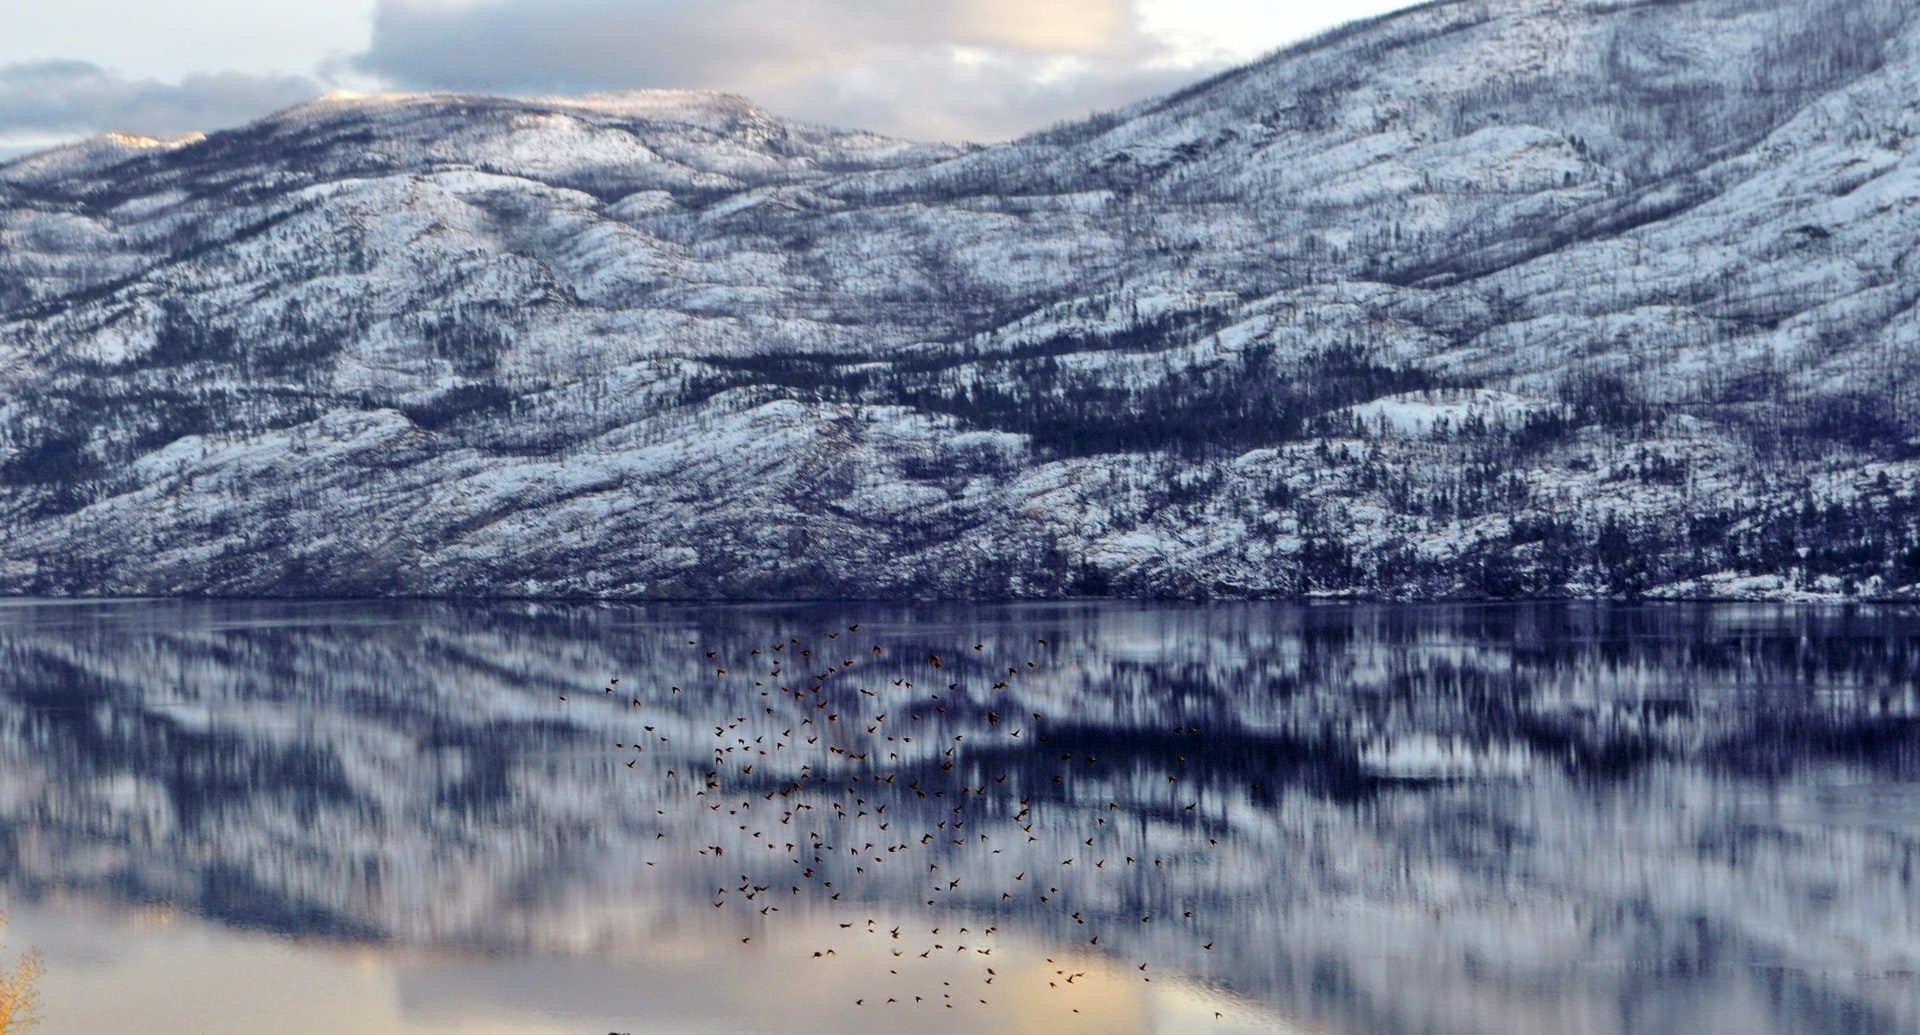 Mountain and lake view of Kelowna after a light snowfall, with birds flying over the lake, highlighting Kelowna snowbirds at The Shore